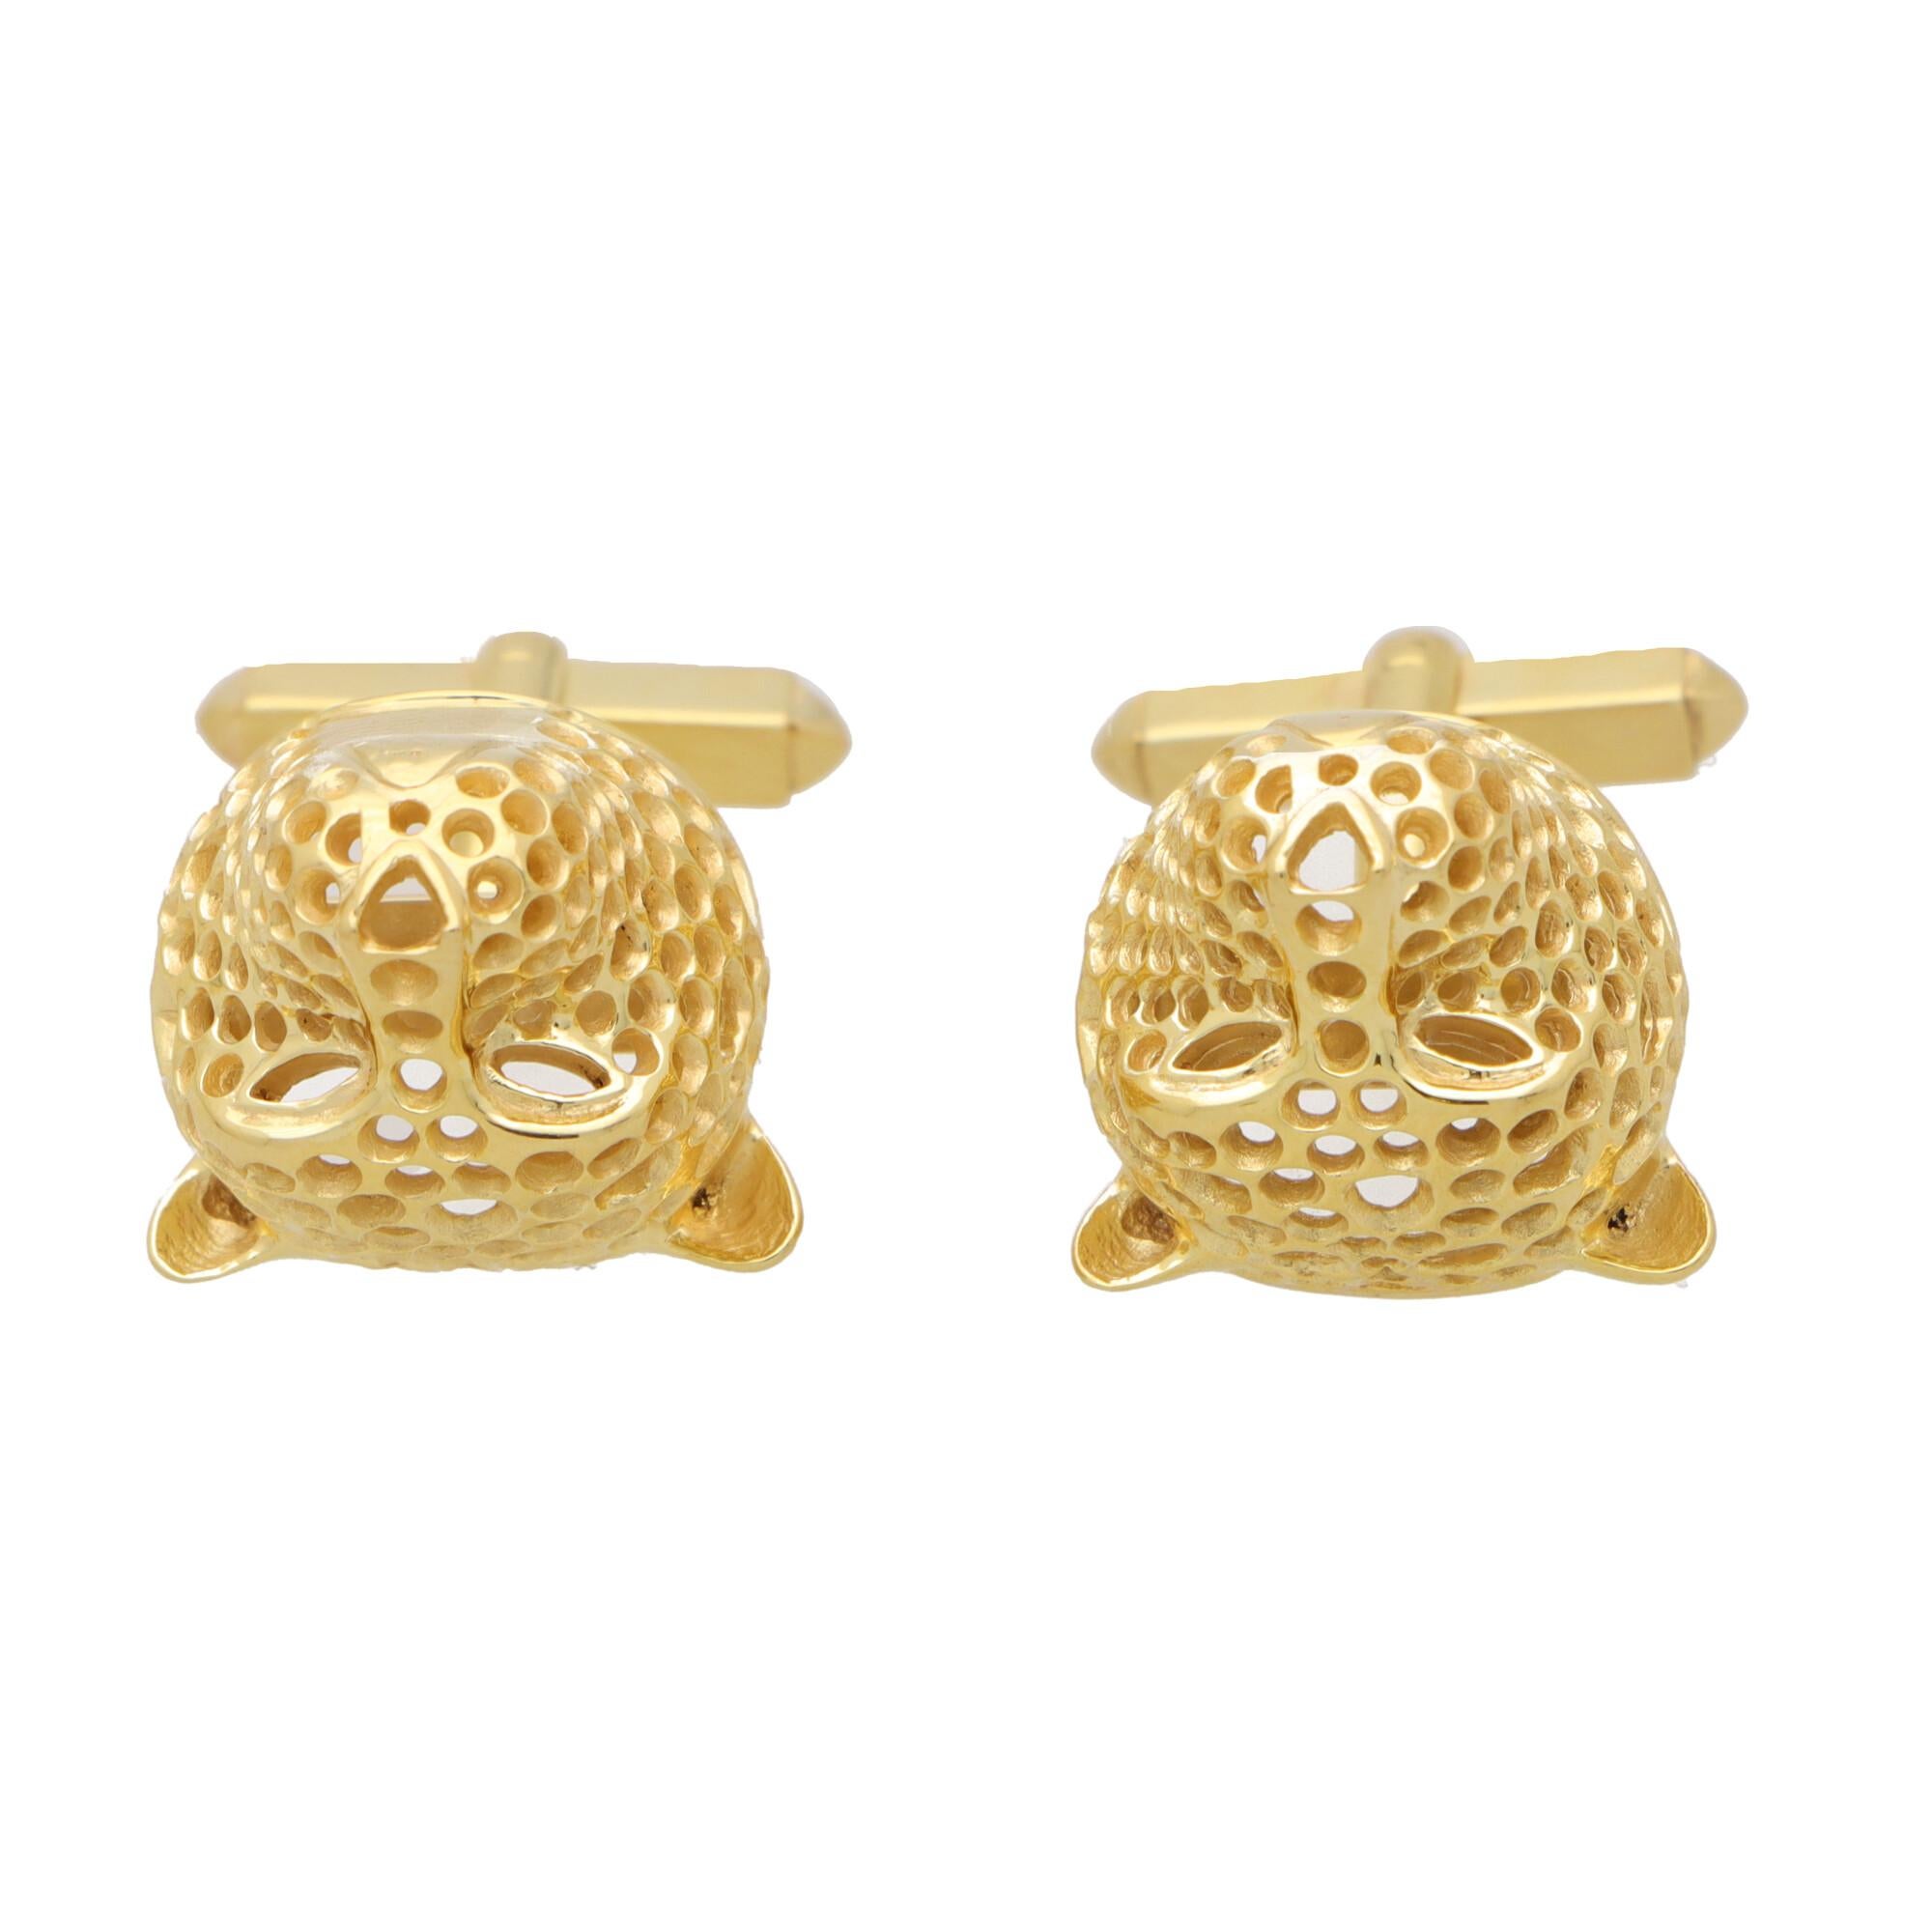 Retro Vintage Panther Head Swivel Back Cufflinks in Platinum and Gold